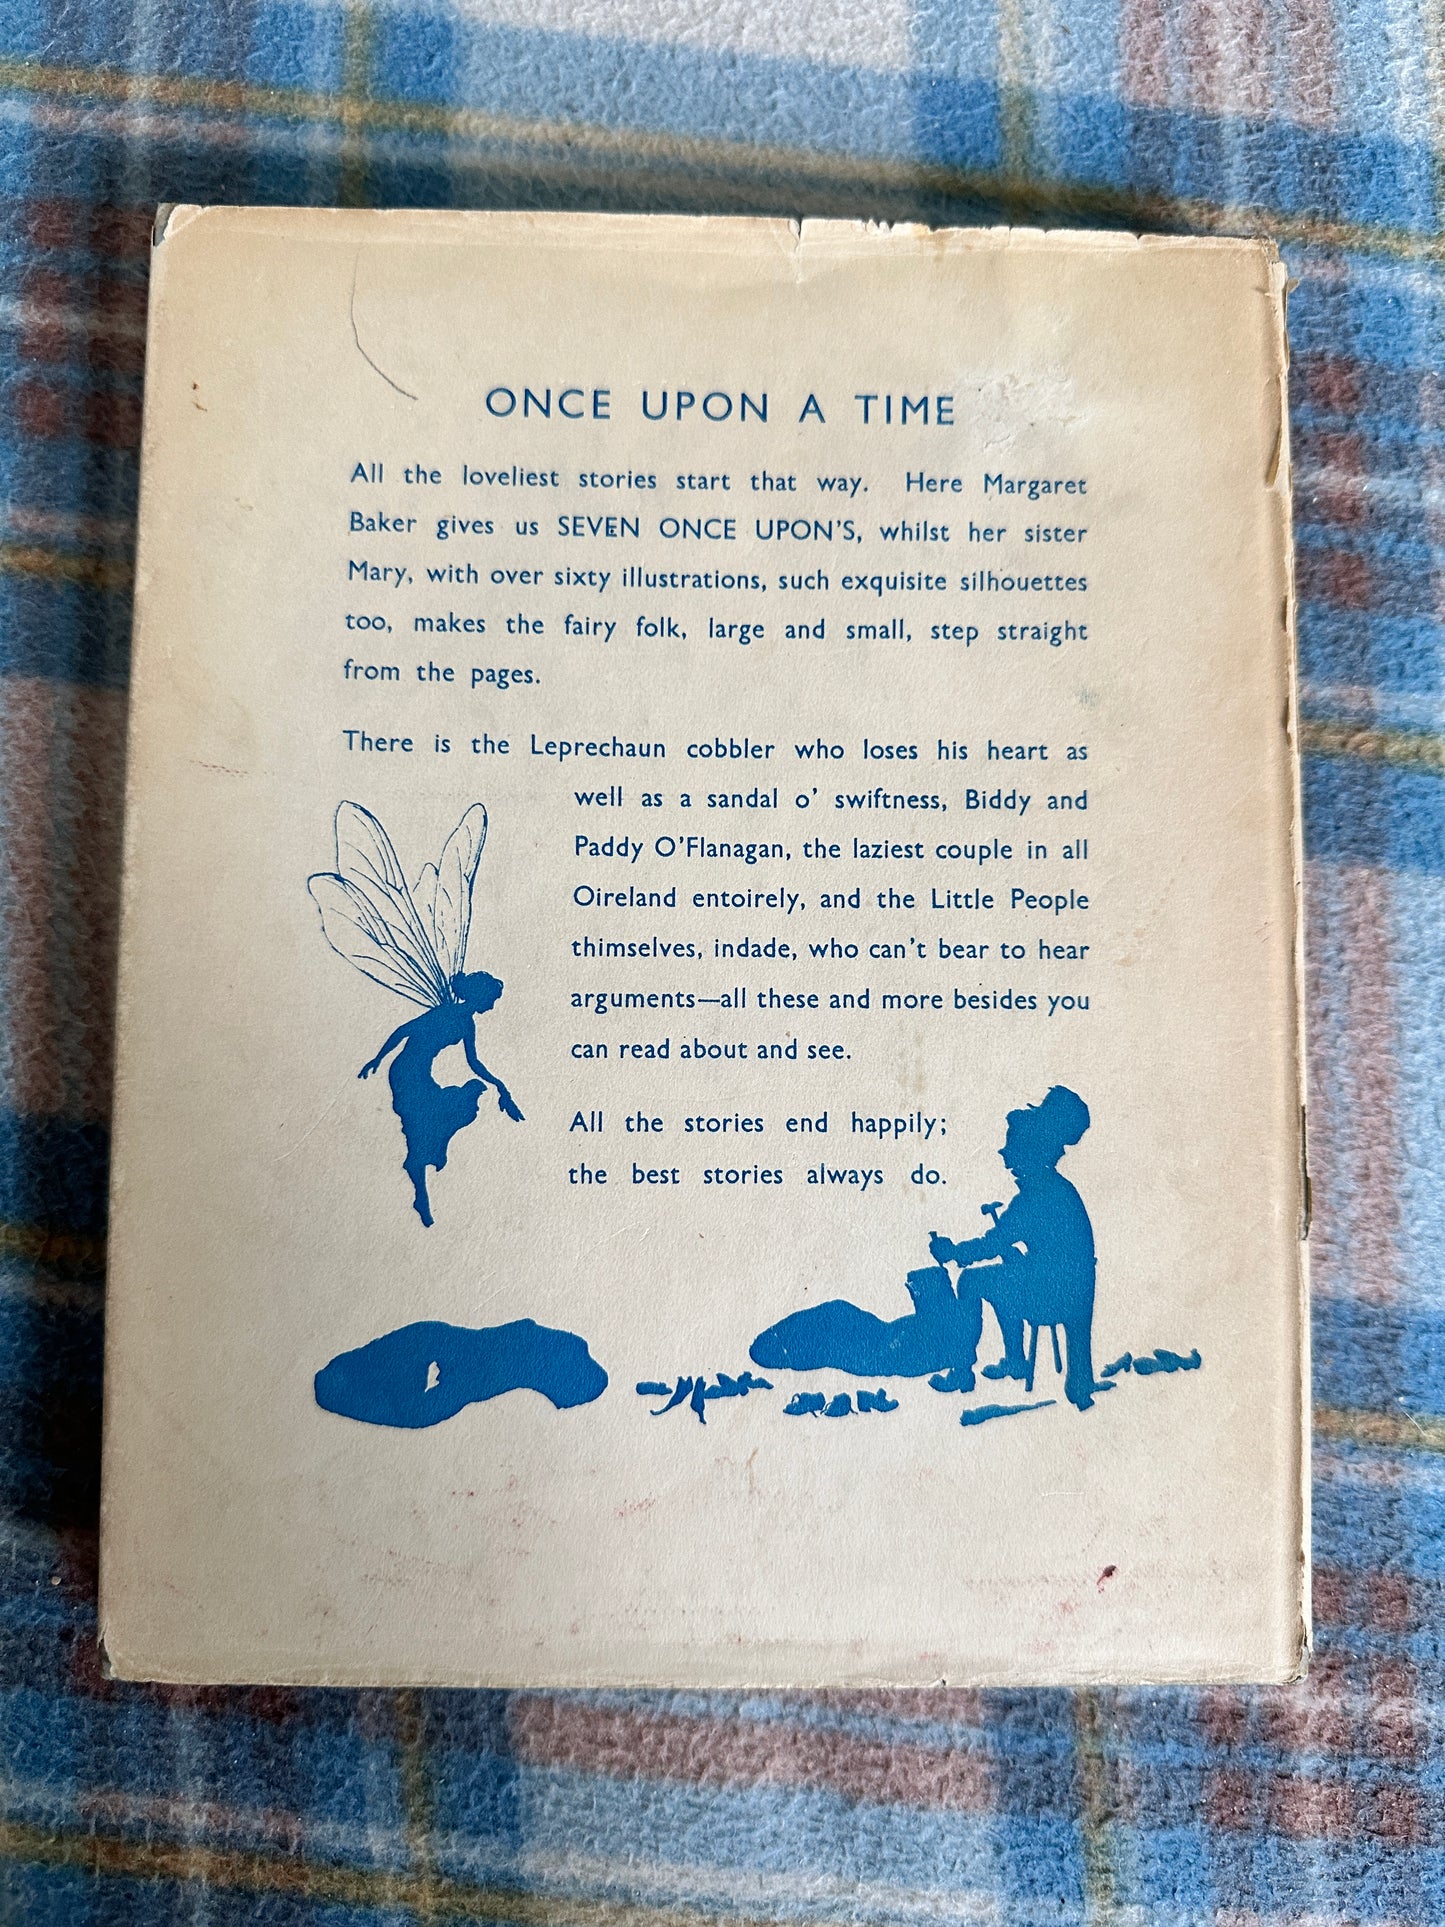 1948*1st* Seven Times Once Upon a Time- Margaret & Mary Baker(Carwal Publications Ltd)